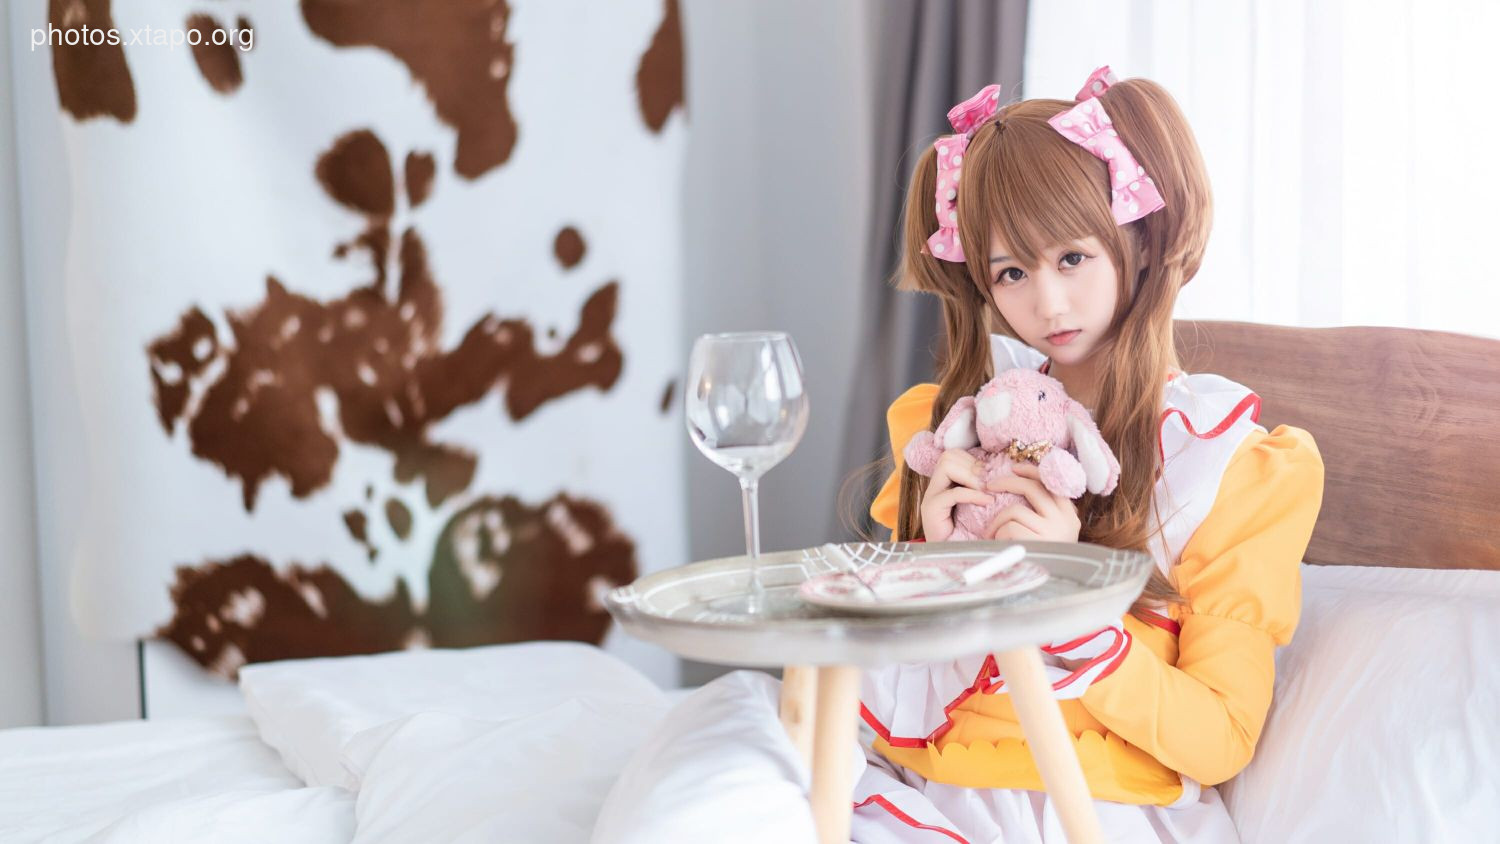 Kagami-chan-I don’t know the dream, private room, dreamland, life 2, spinning photo74P